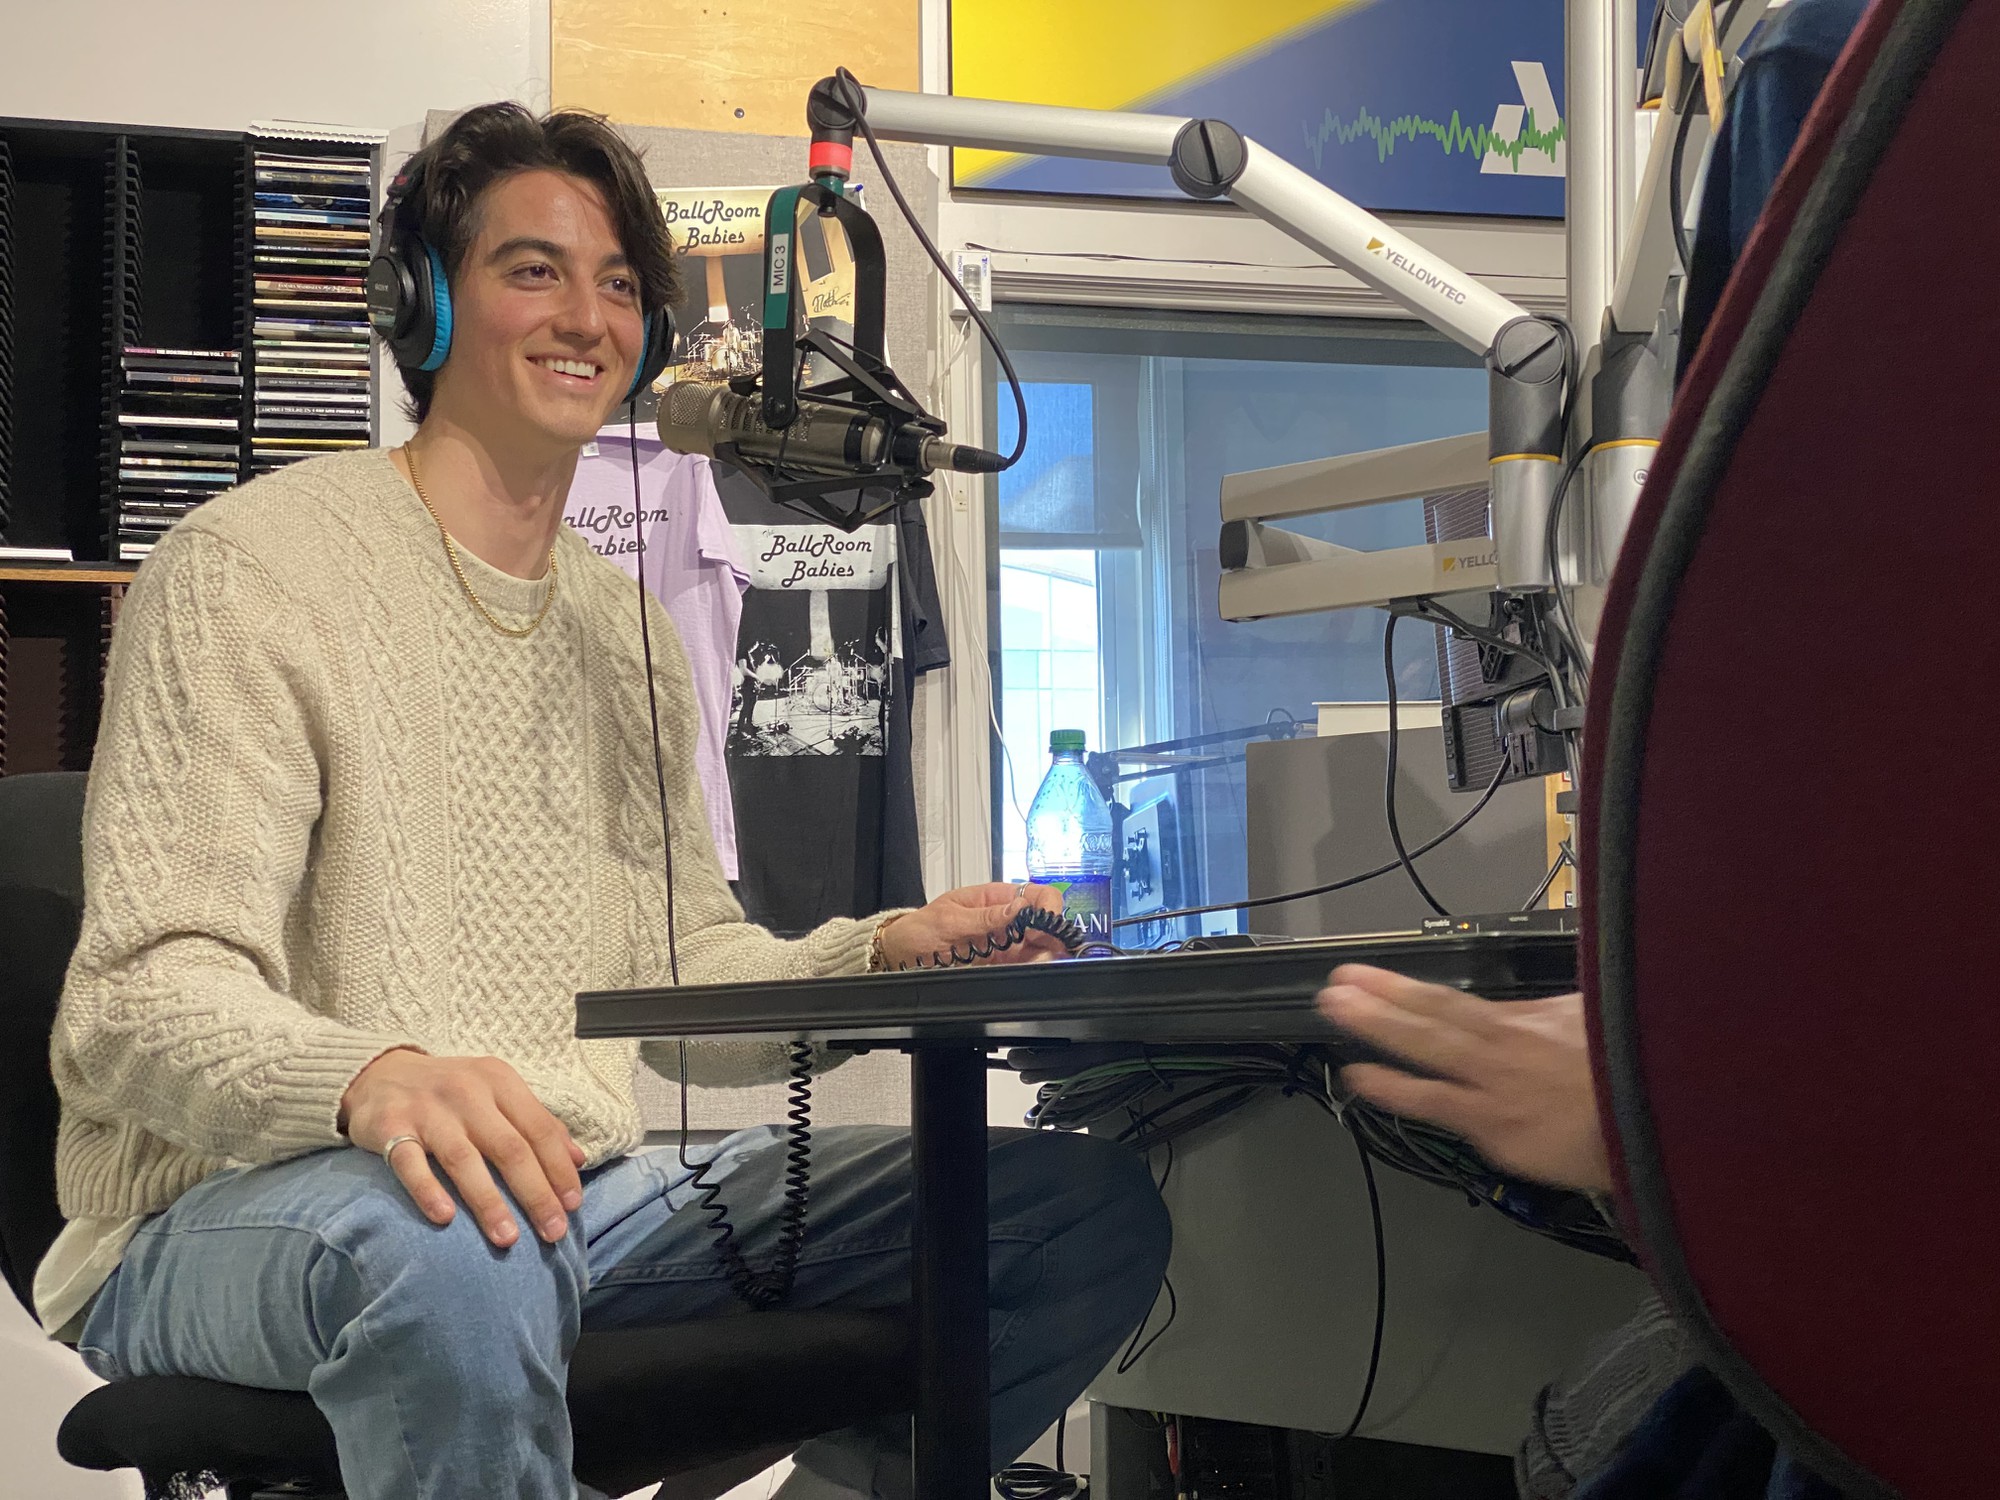 Elijah Woods visited the CKDJ studio on campus in March to talk about his time at the college, his early days with Jamie Fine and the future.